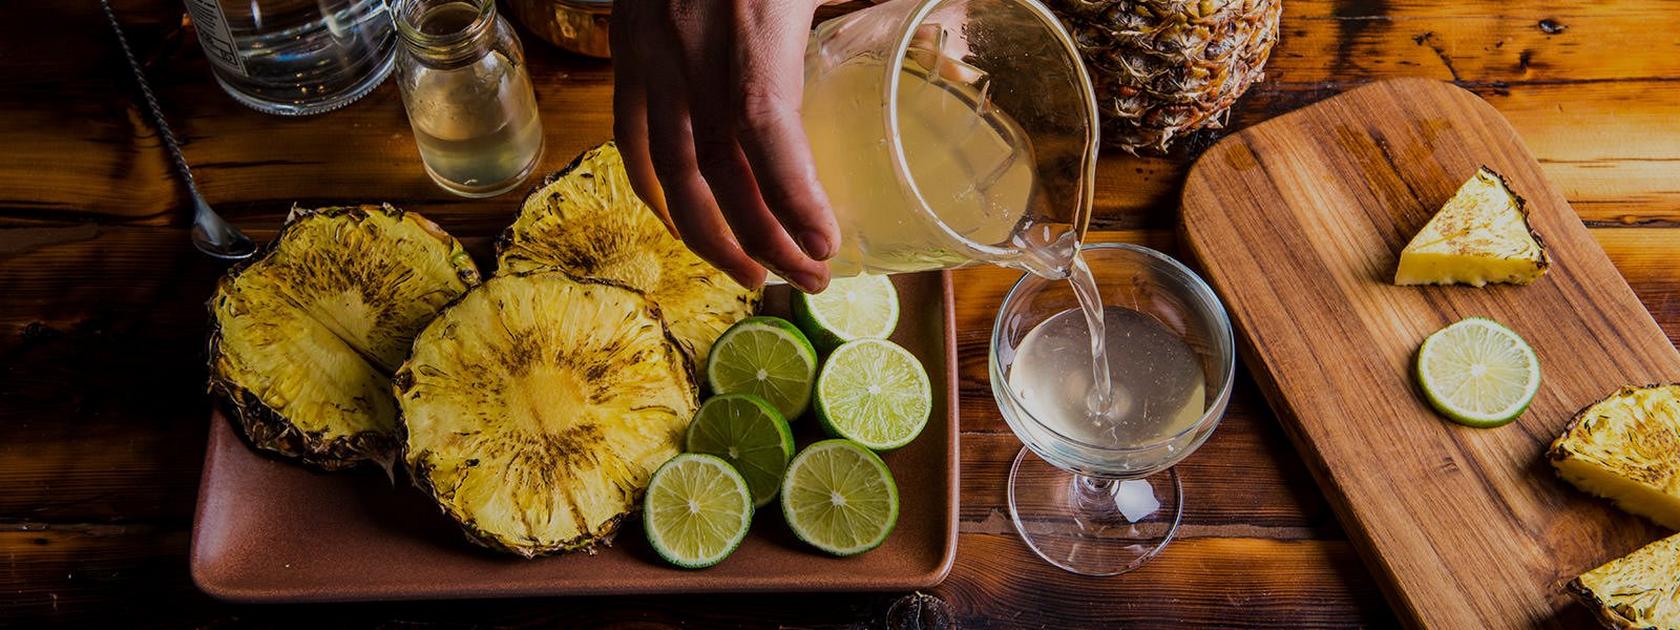 How to Make Smoky Grilled Pineapple Cocktail Syrup